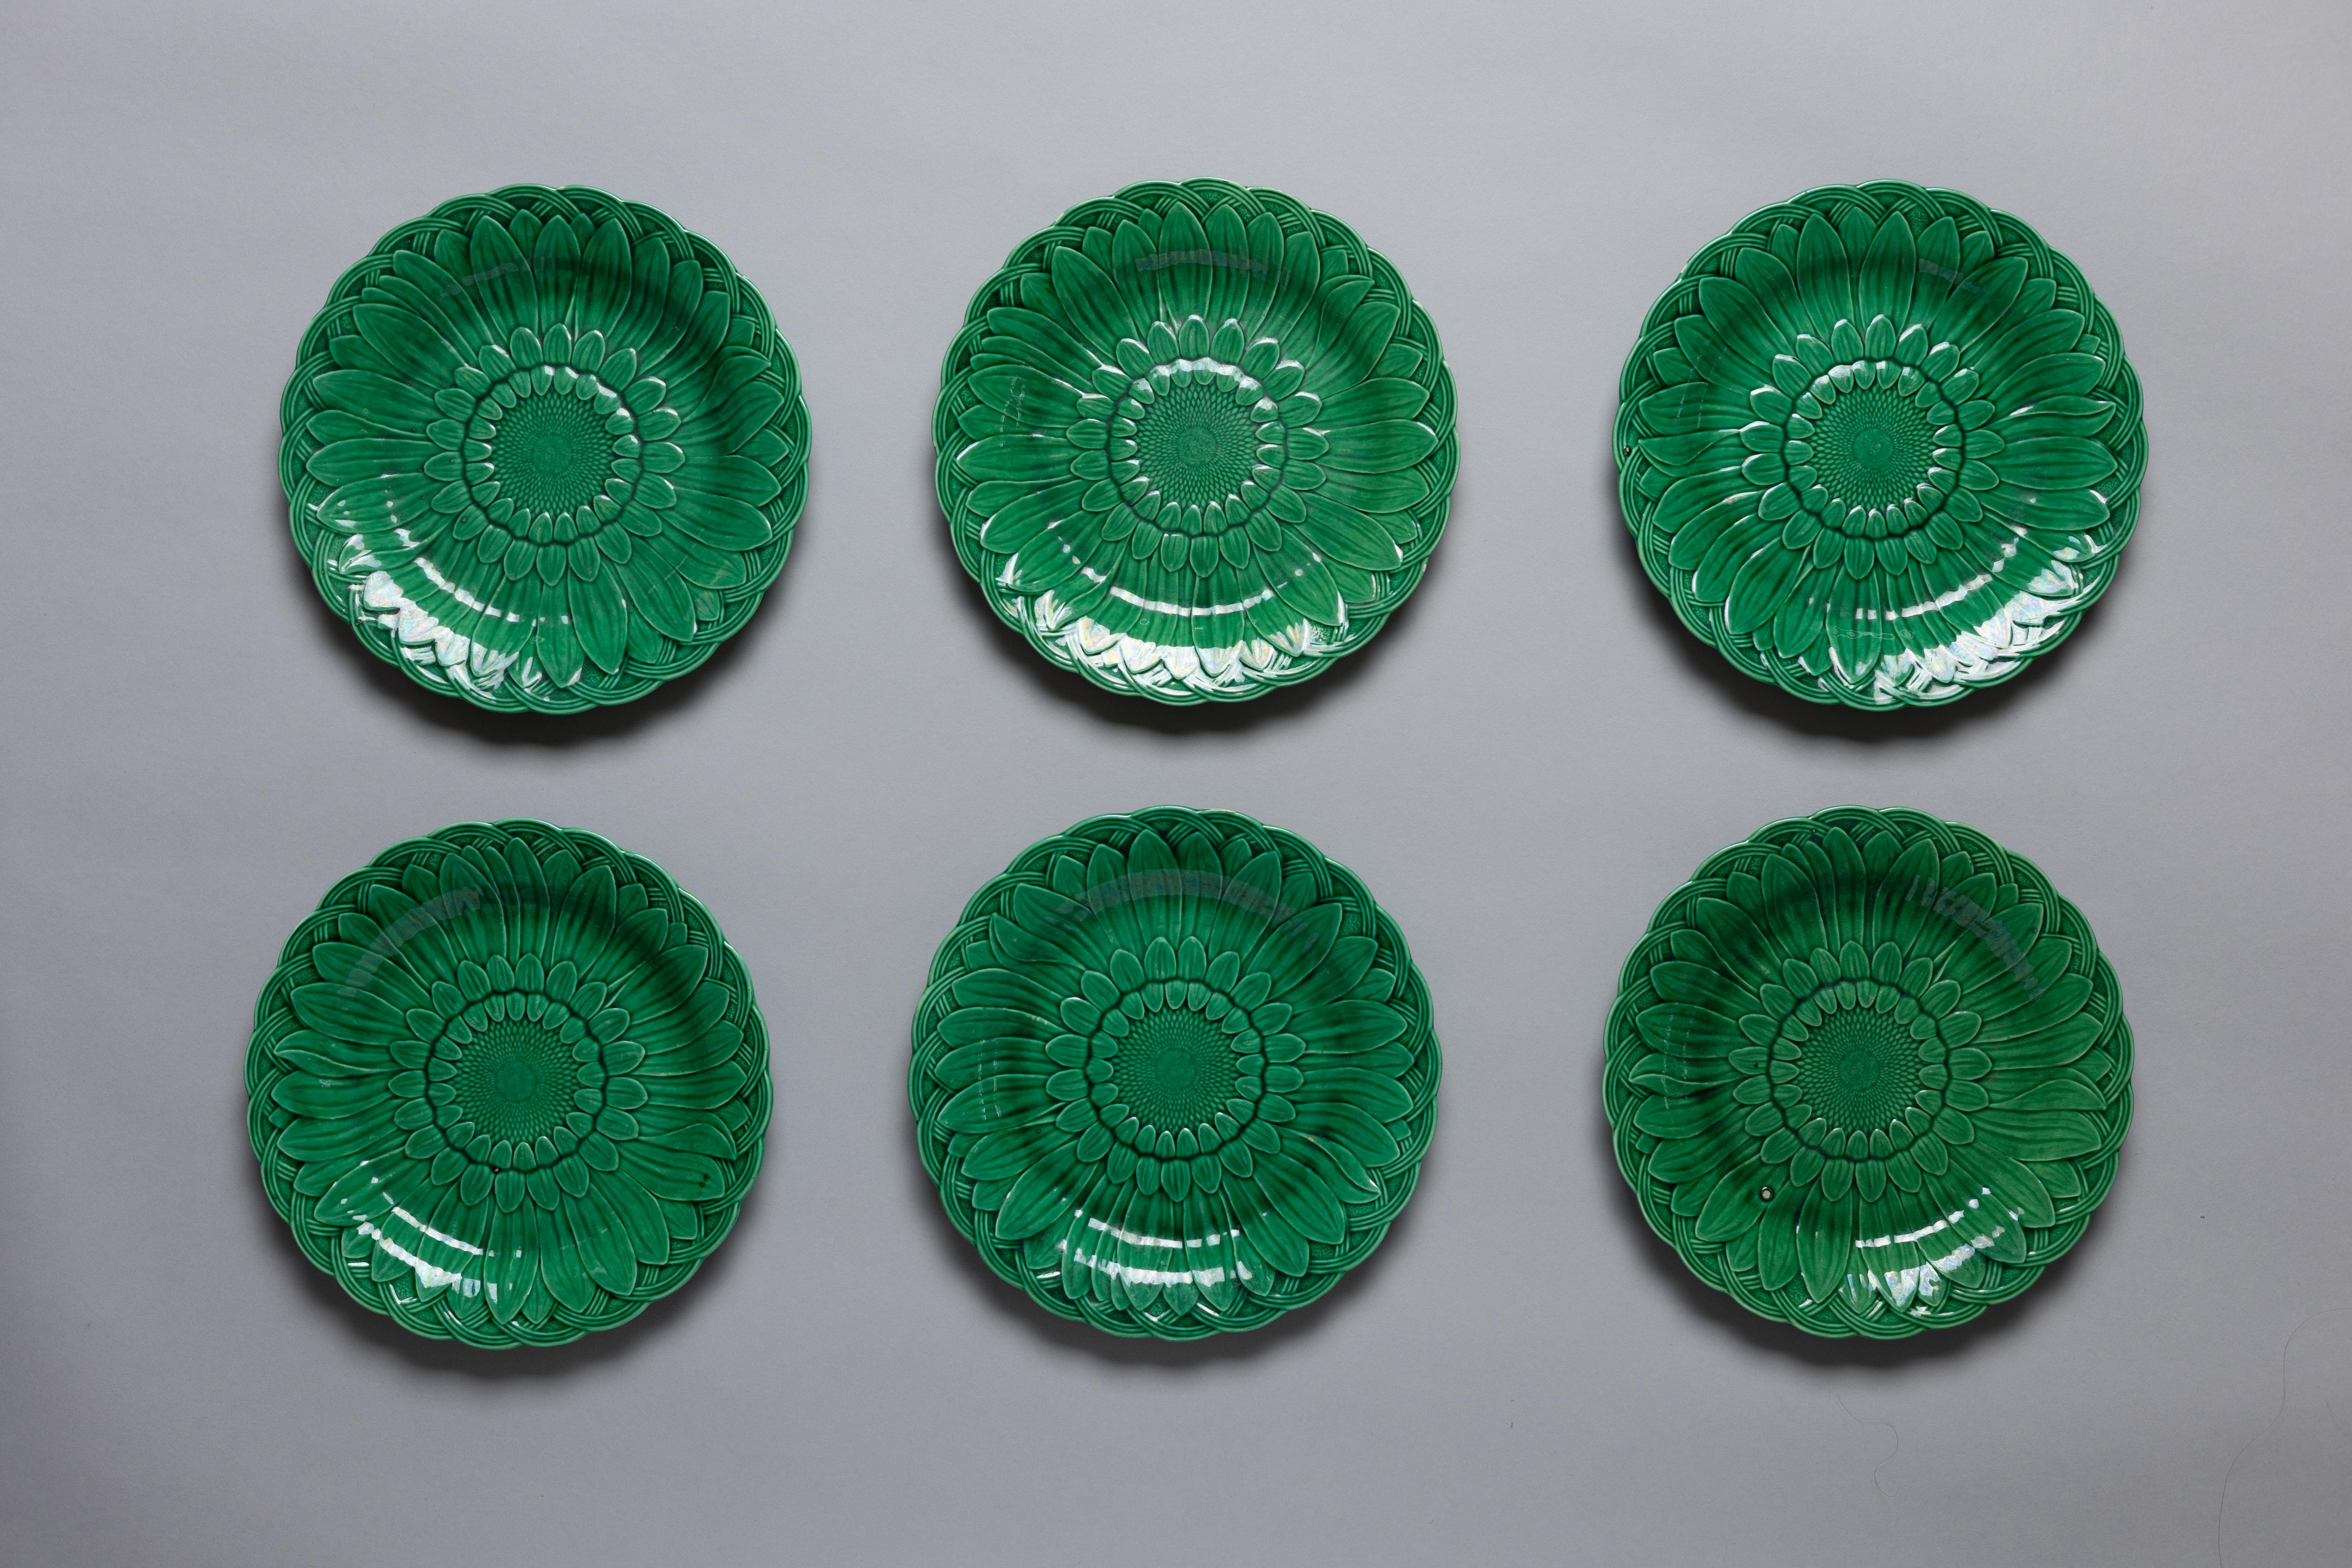 Set of 12 green majolica glazed dinner plates in the ‘Sunflower’ pattern by Wedgwood, made circa 1880.

The sunflower, alongside the calla lily and peacock feather, became an emblem of the late nineteenth-century Aesthetic Movement. Oscar Wilde